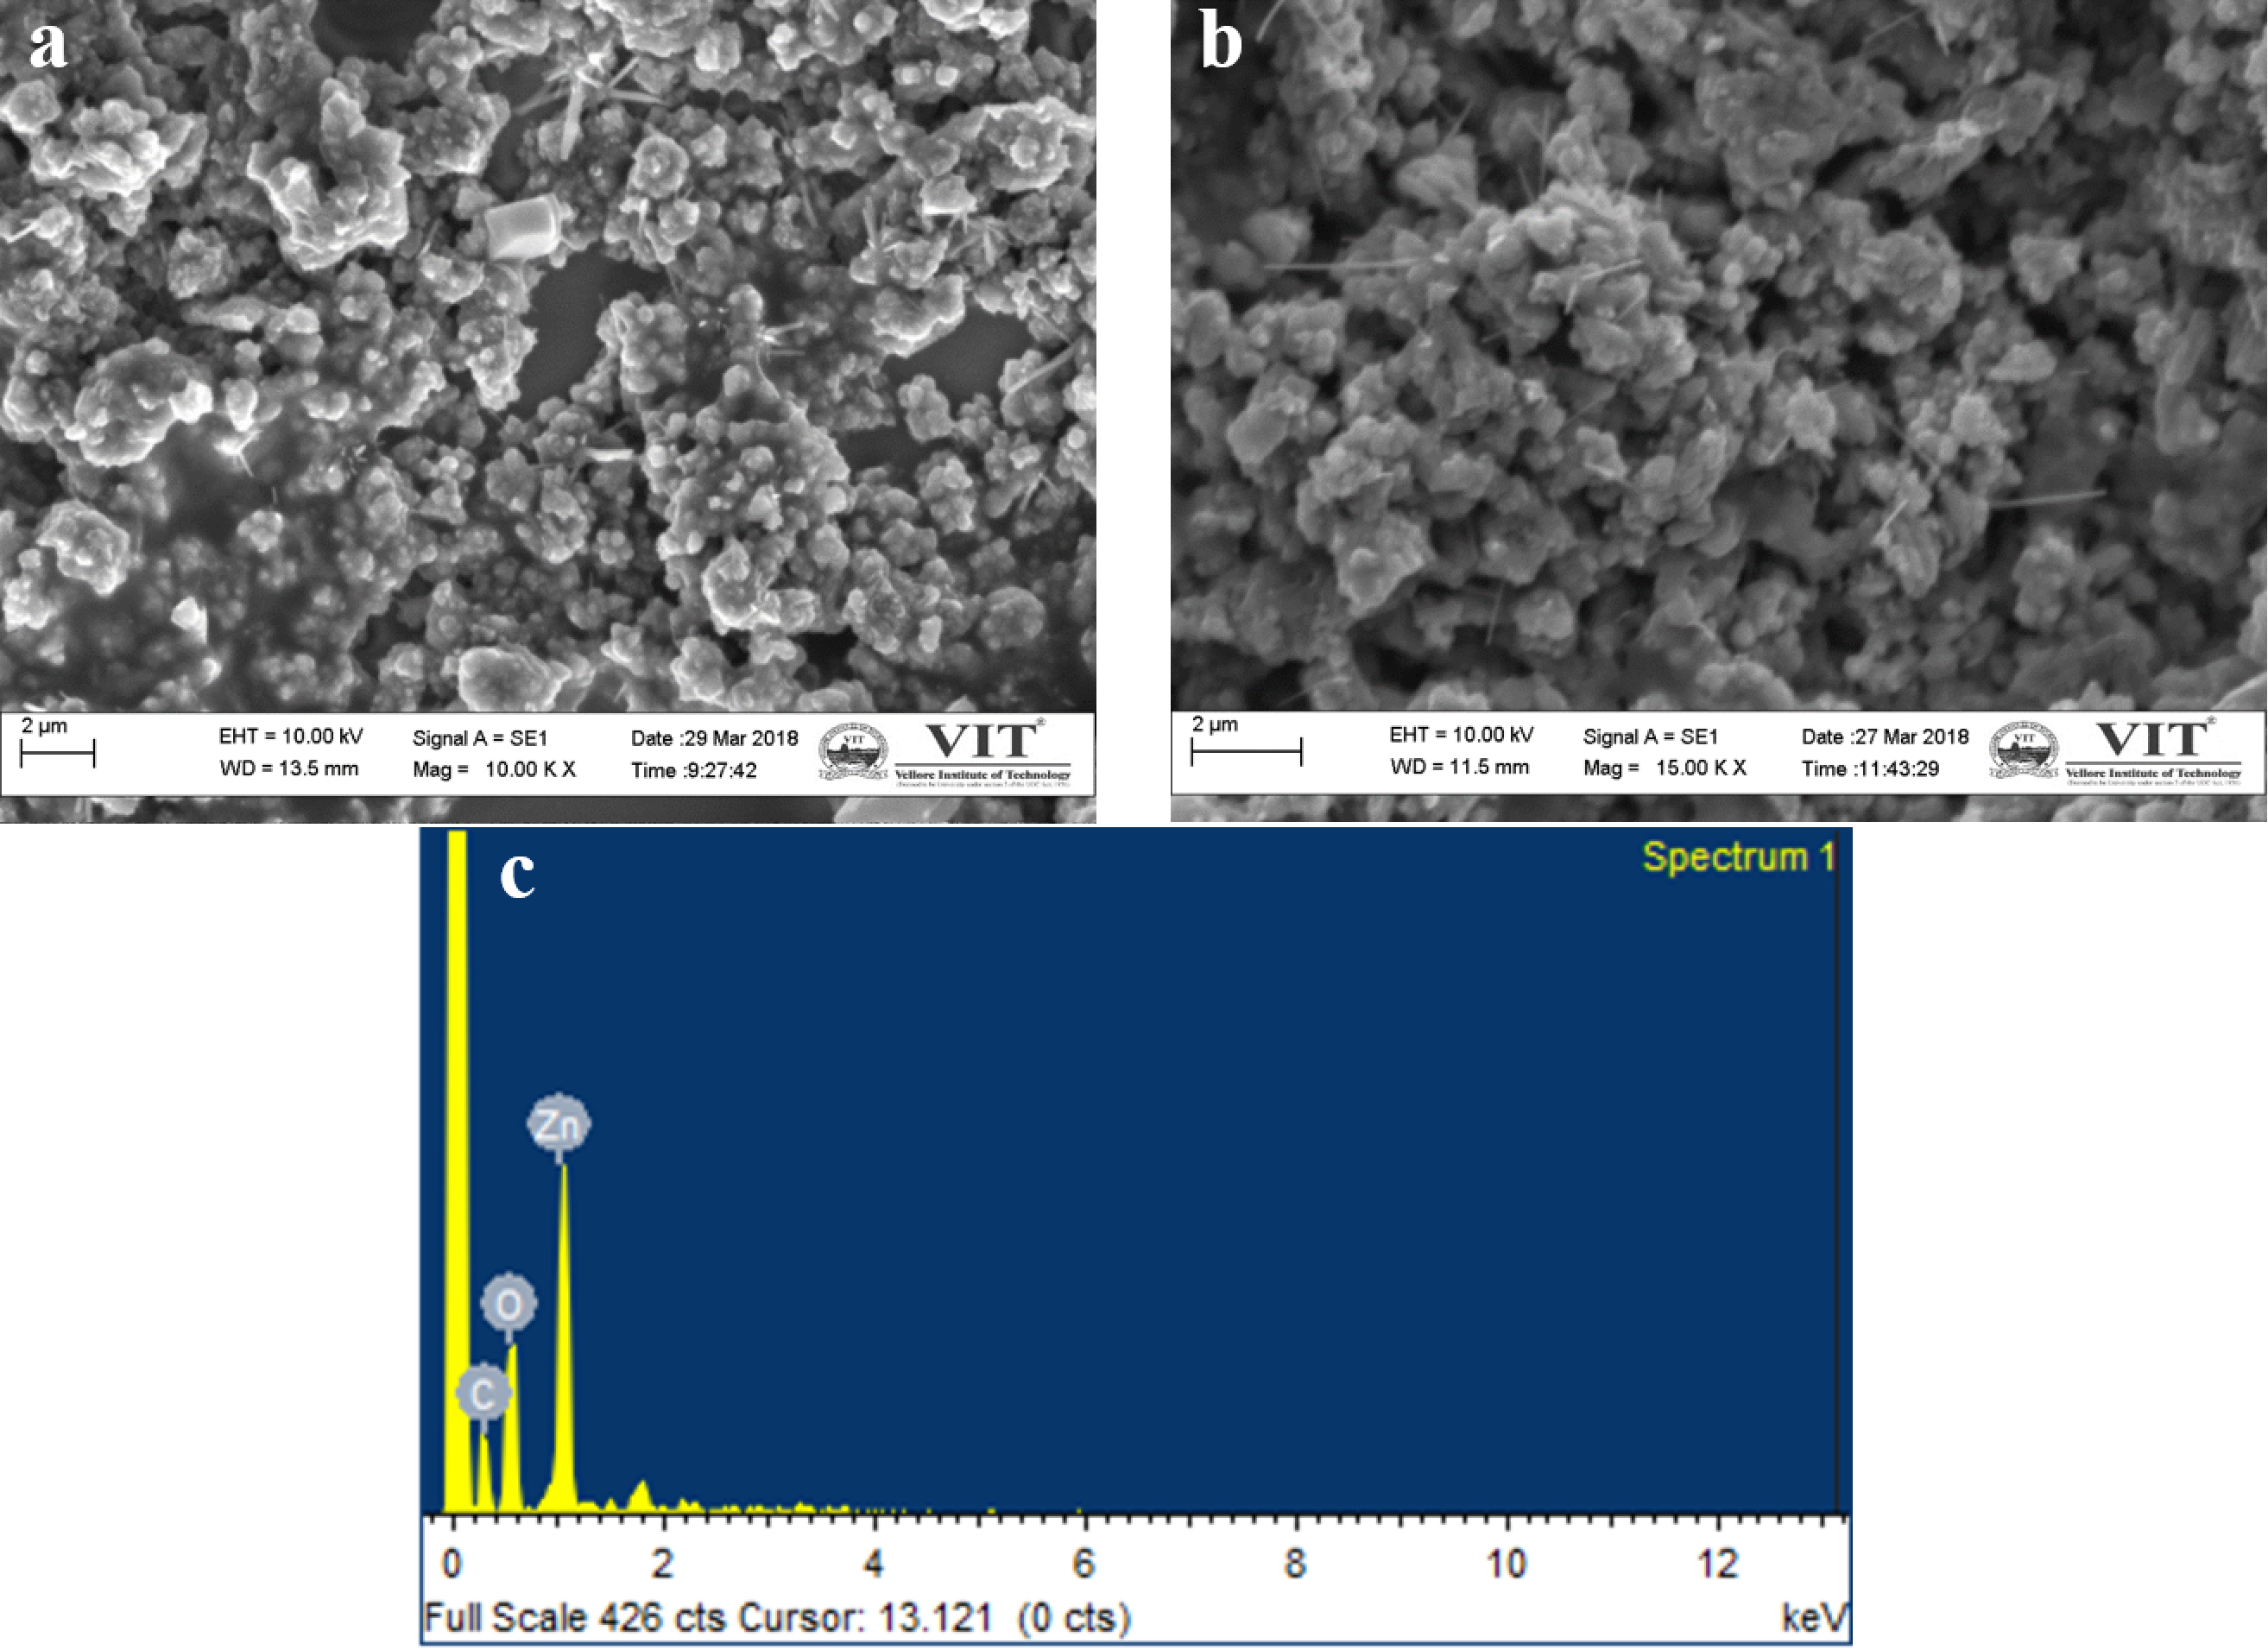 Figure 4. Scanning electron microscopy (SEM) images of a) ZnO nanoparticle, b) after PA addition and c) EDAX spectrum of ZnO nanoparticle.